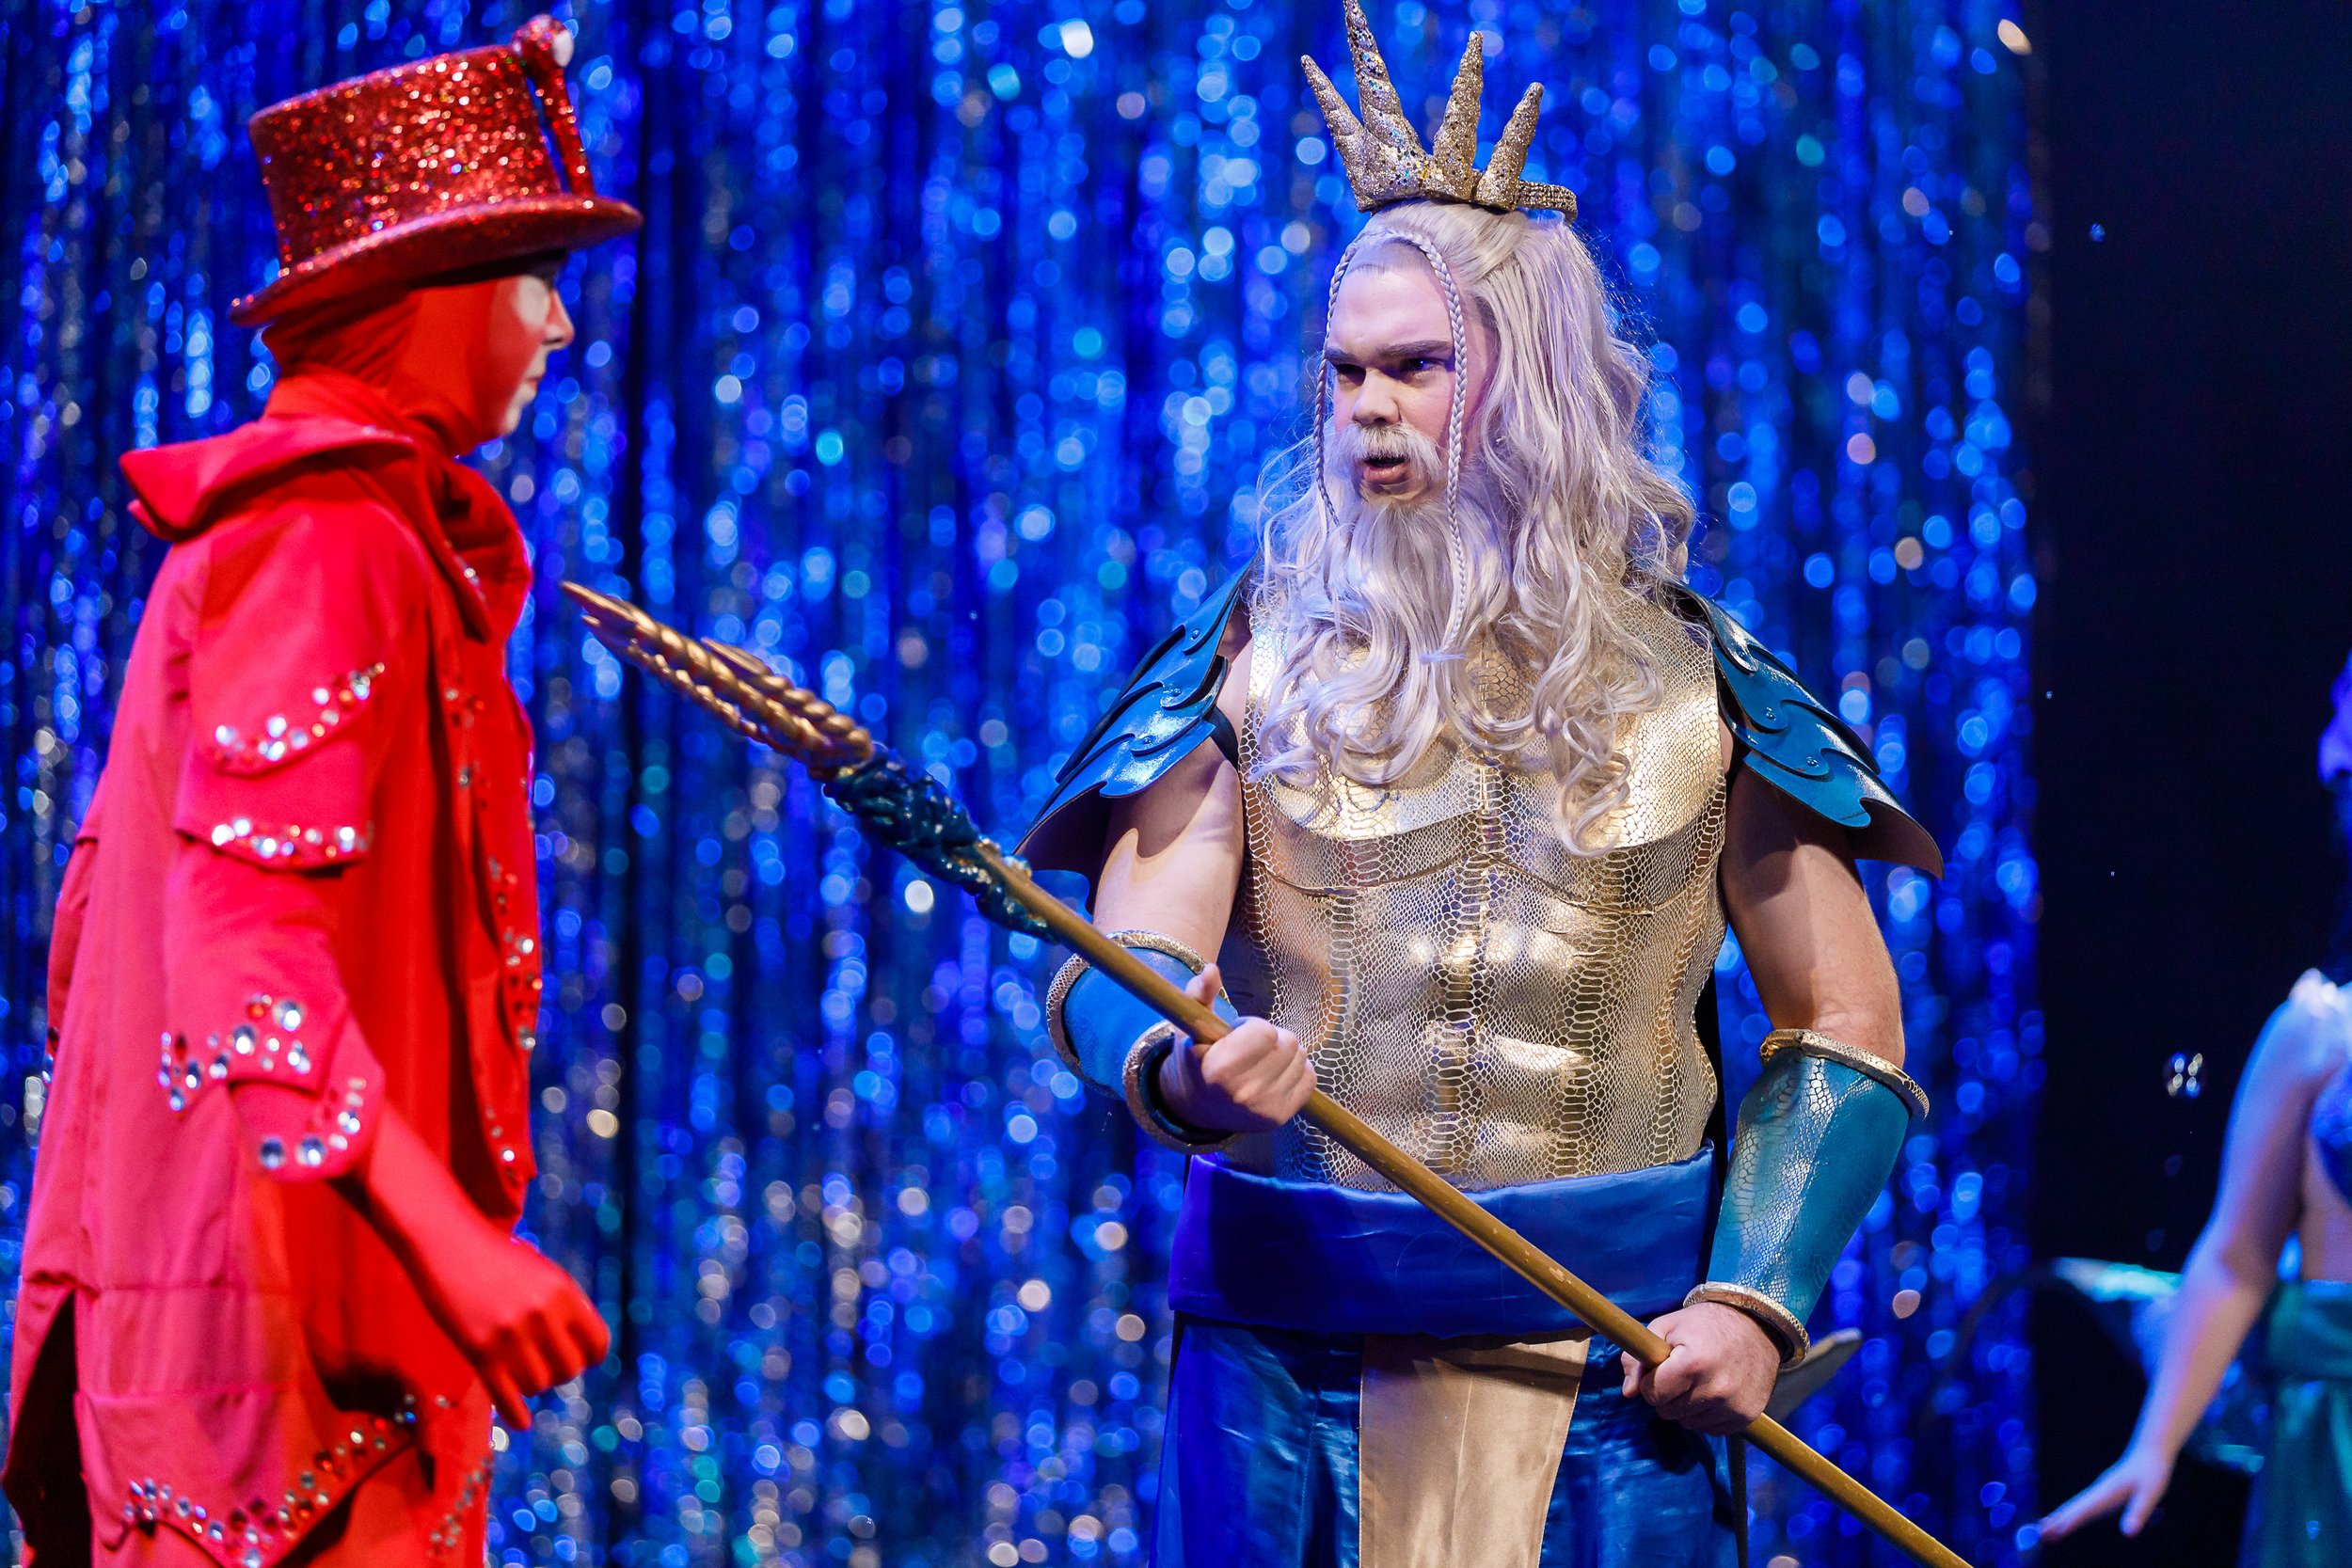 MTCC_The_Little_Mermaid_Preview_20240418_027 [Deprimo Photography].jpg